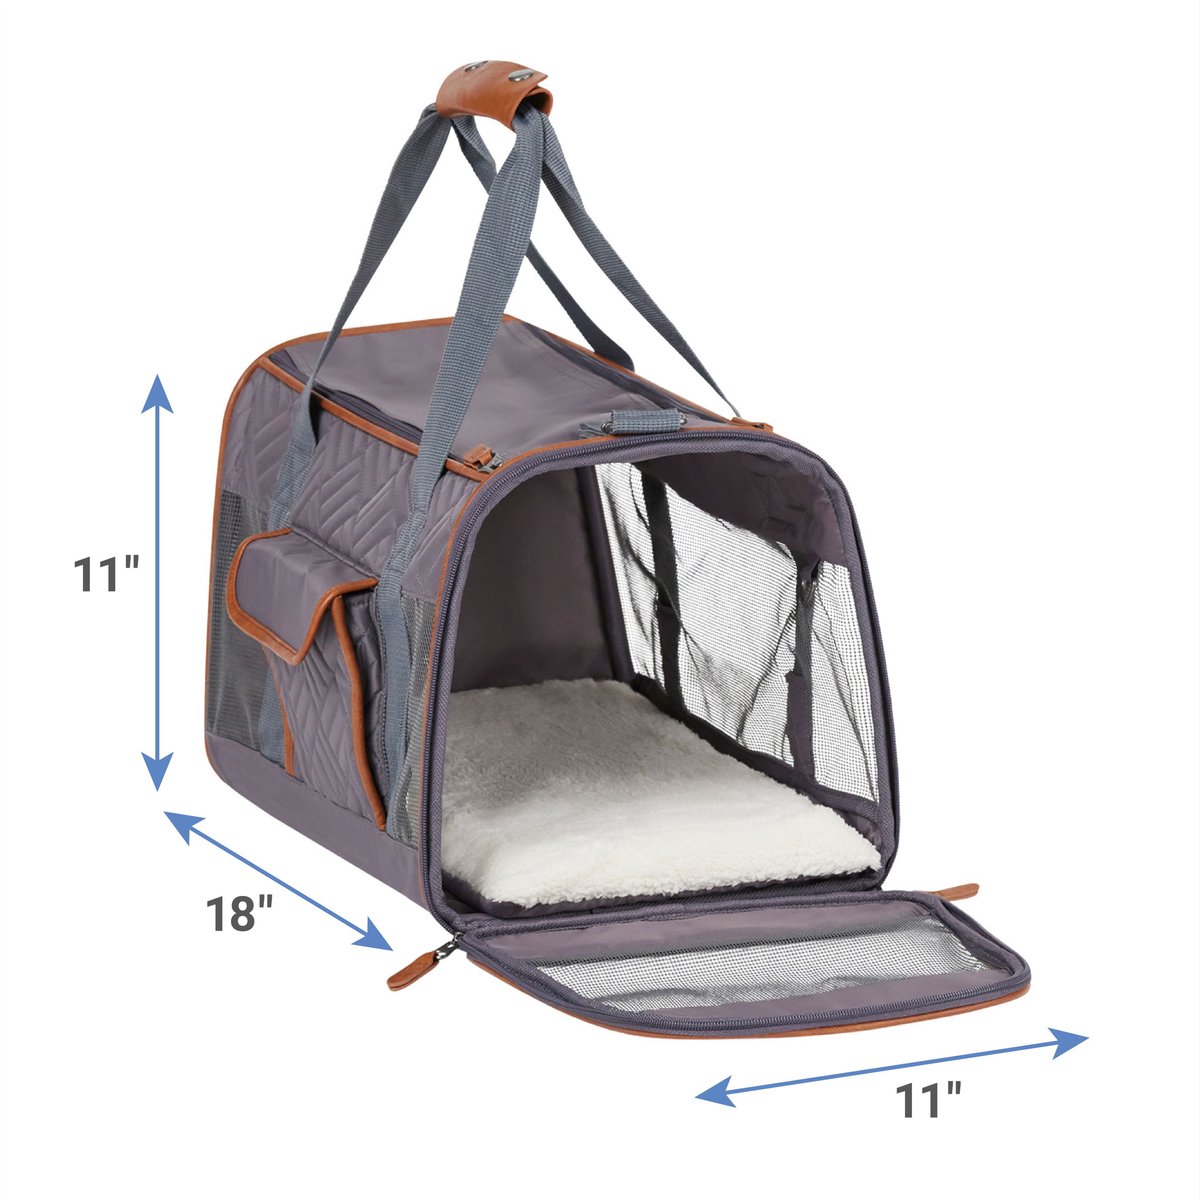 Pet Carrier,Cat Carrier Bag Airline Approved Dog Carriers for Small  Dogs,Medium,Small Cats,Travel Carrier Comfort Portable Pet Bag for Cats  with Harness,Nail Clippers,Hair Removal Brush,Foldable Bowl : Amazon.in:  Pet Supplies